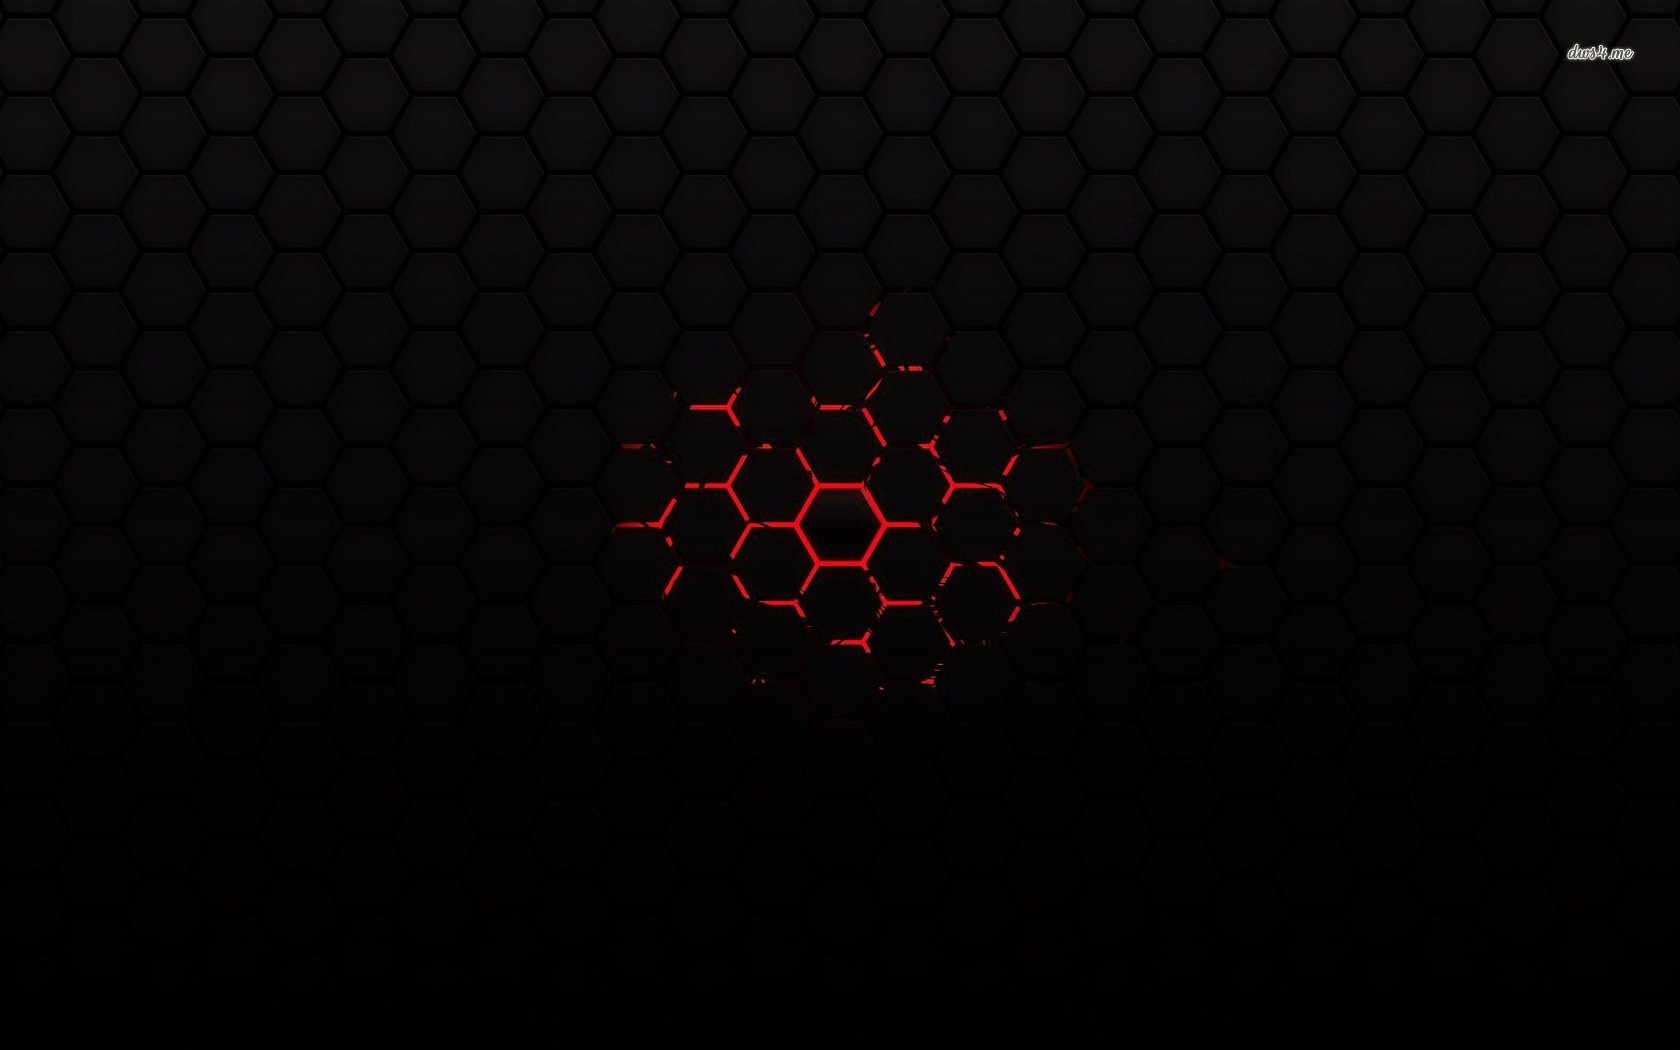 Red on black honeycomb pattern wallpaper - Abstract wallpapers ...